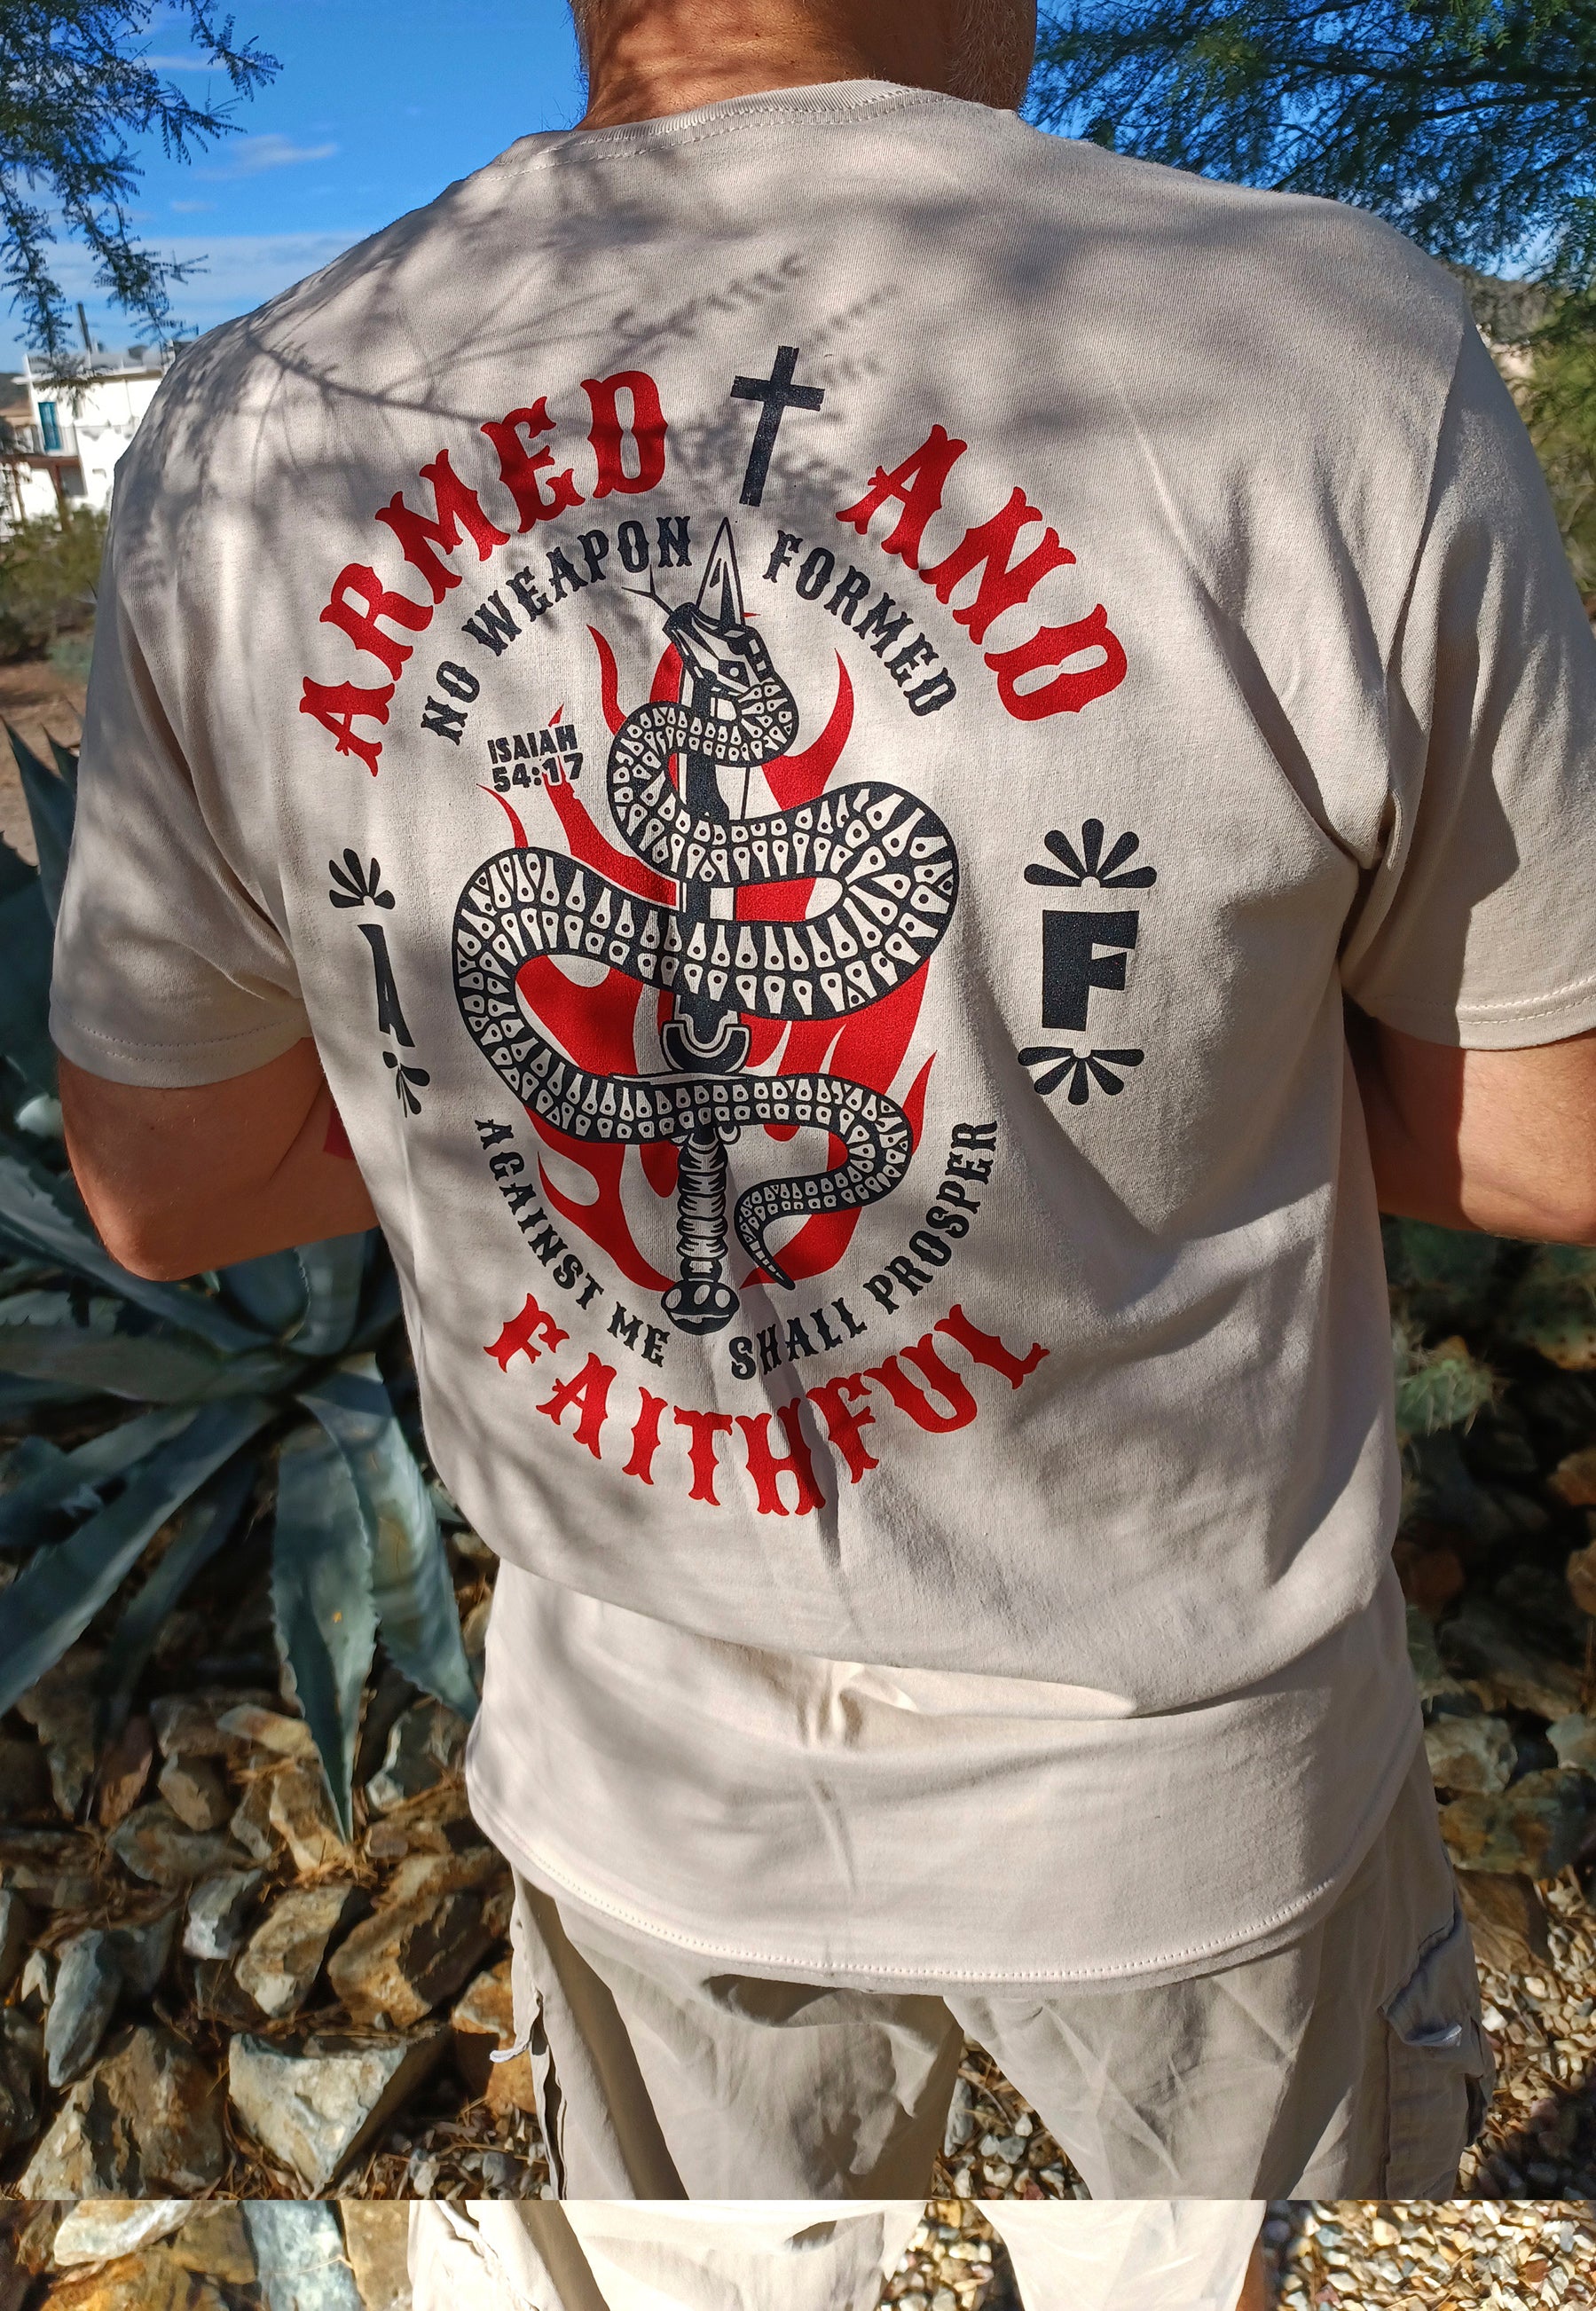 Armed and faithful Christian patriot t-shirt on model